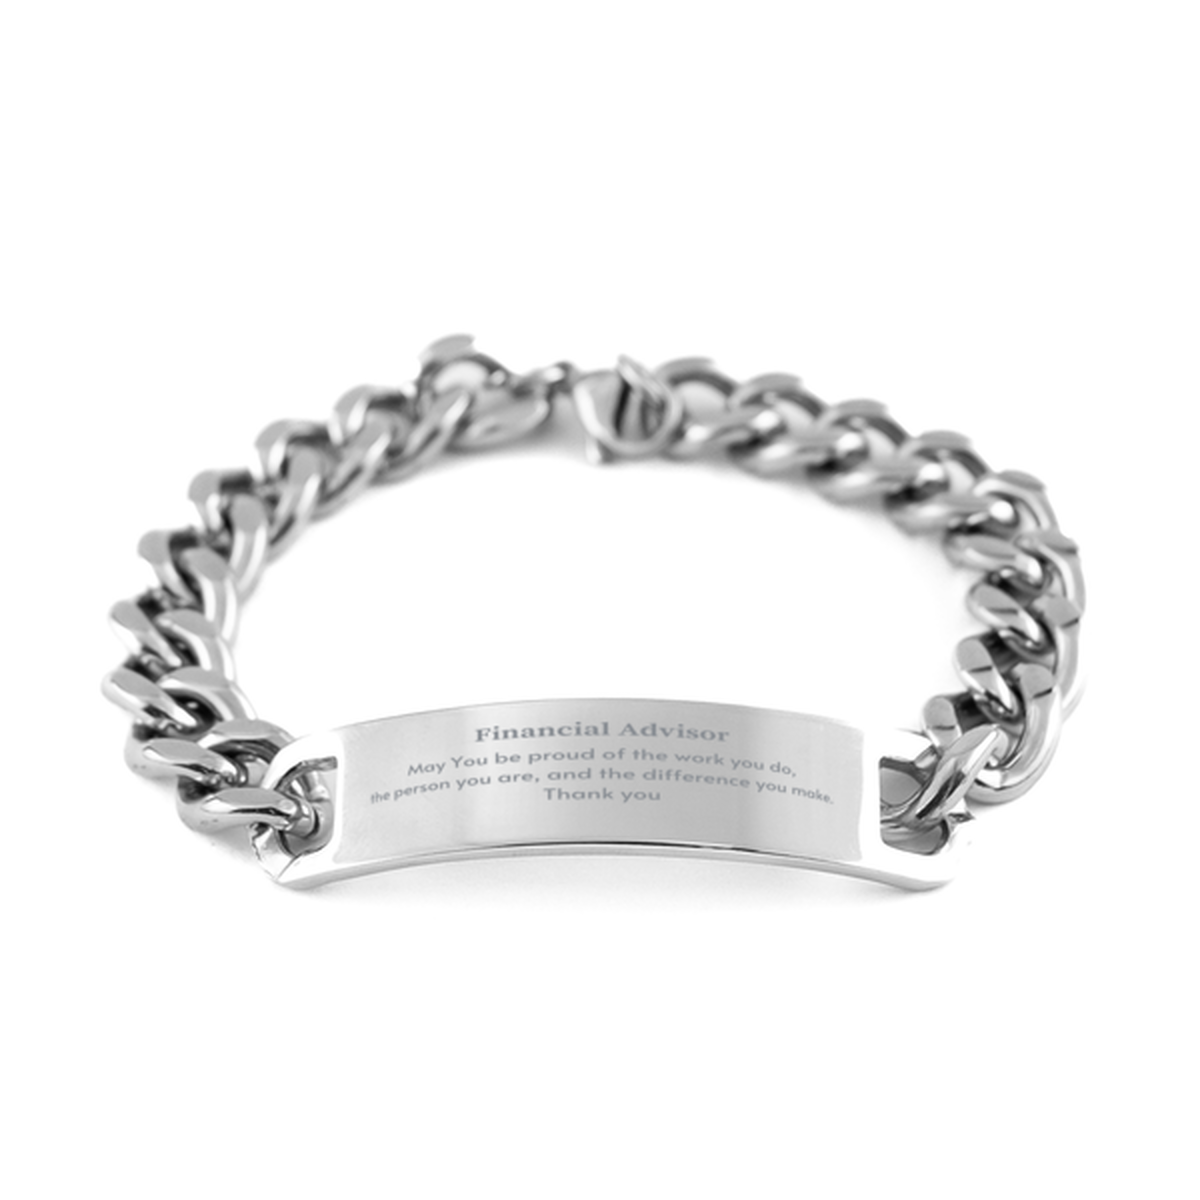 Heartwarming Cuban Chain Stainless Steel Bracelet Retirement Coworkers Gifts for Financial Advisor, Financial Advisor May You be proud of the work you do, the person you are Gifts for Boss Men Women Friends